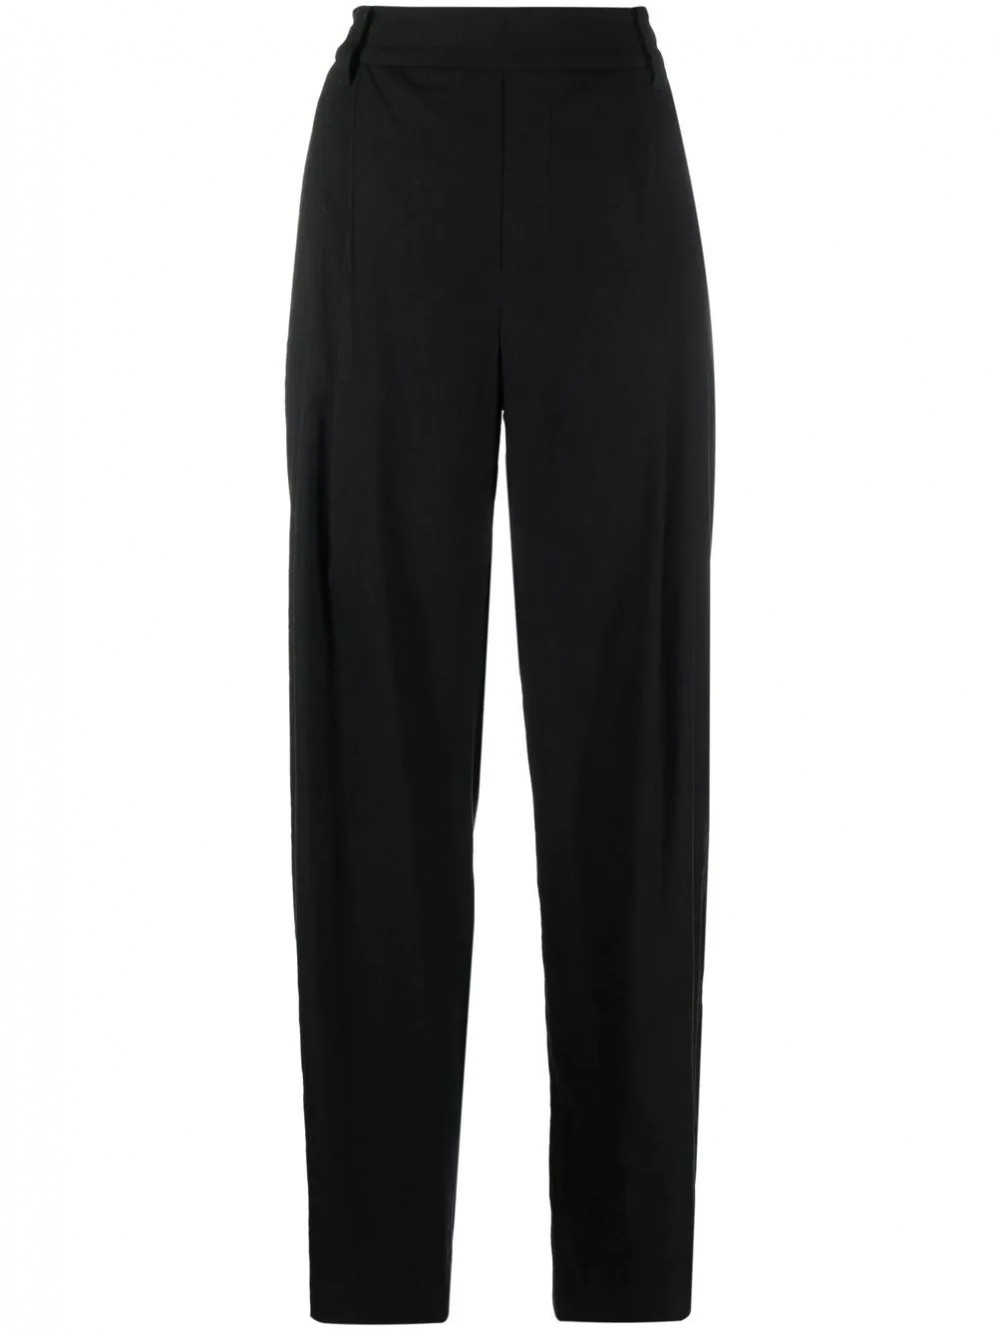 Pleat front pull on pant